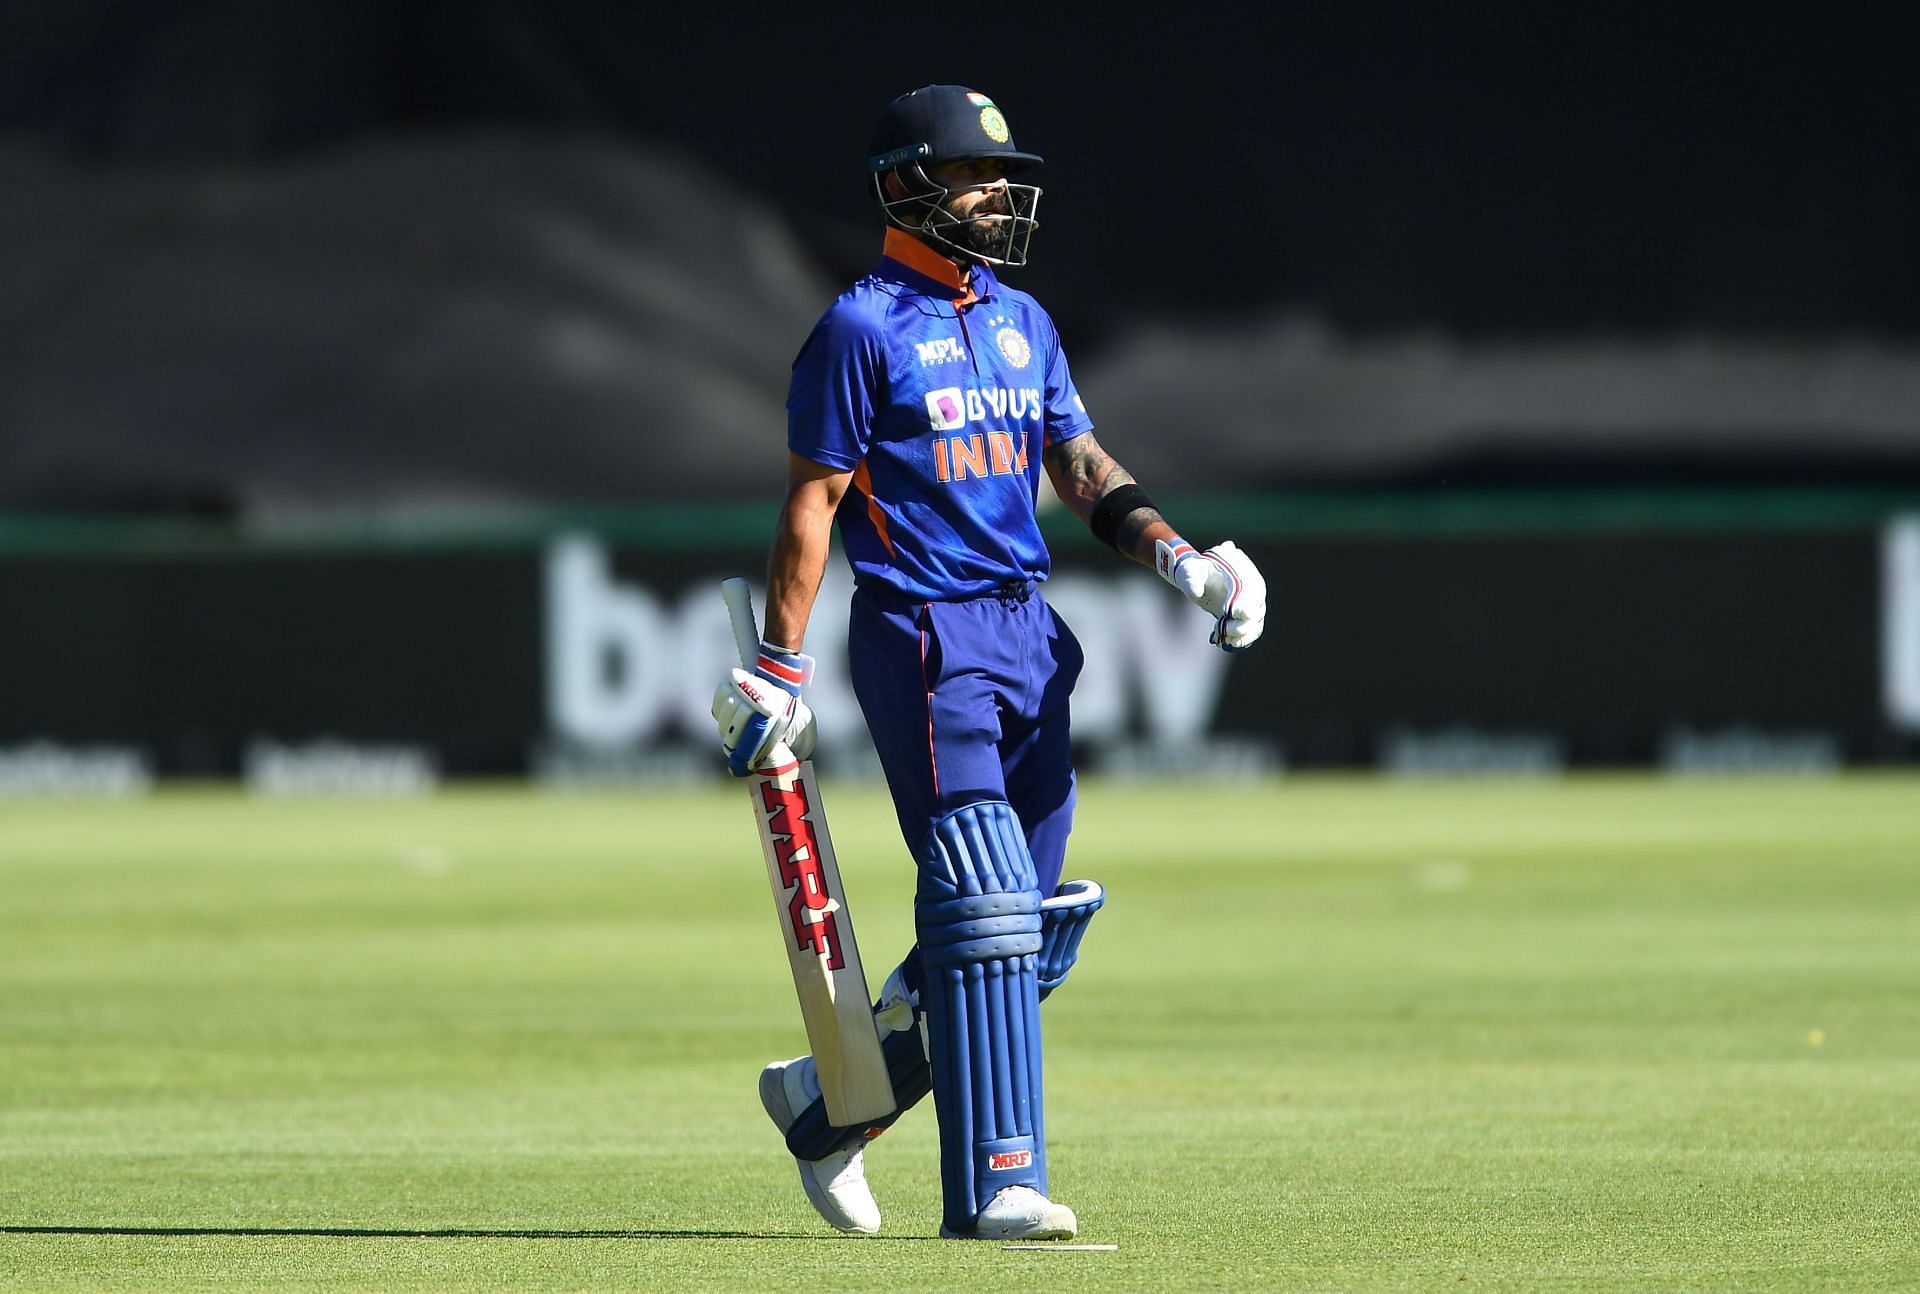 Virat Kohli was dismissed cheaply in the first ODI against West Indies